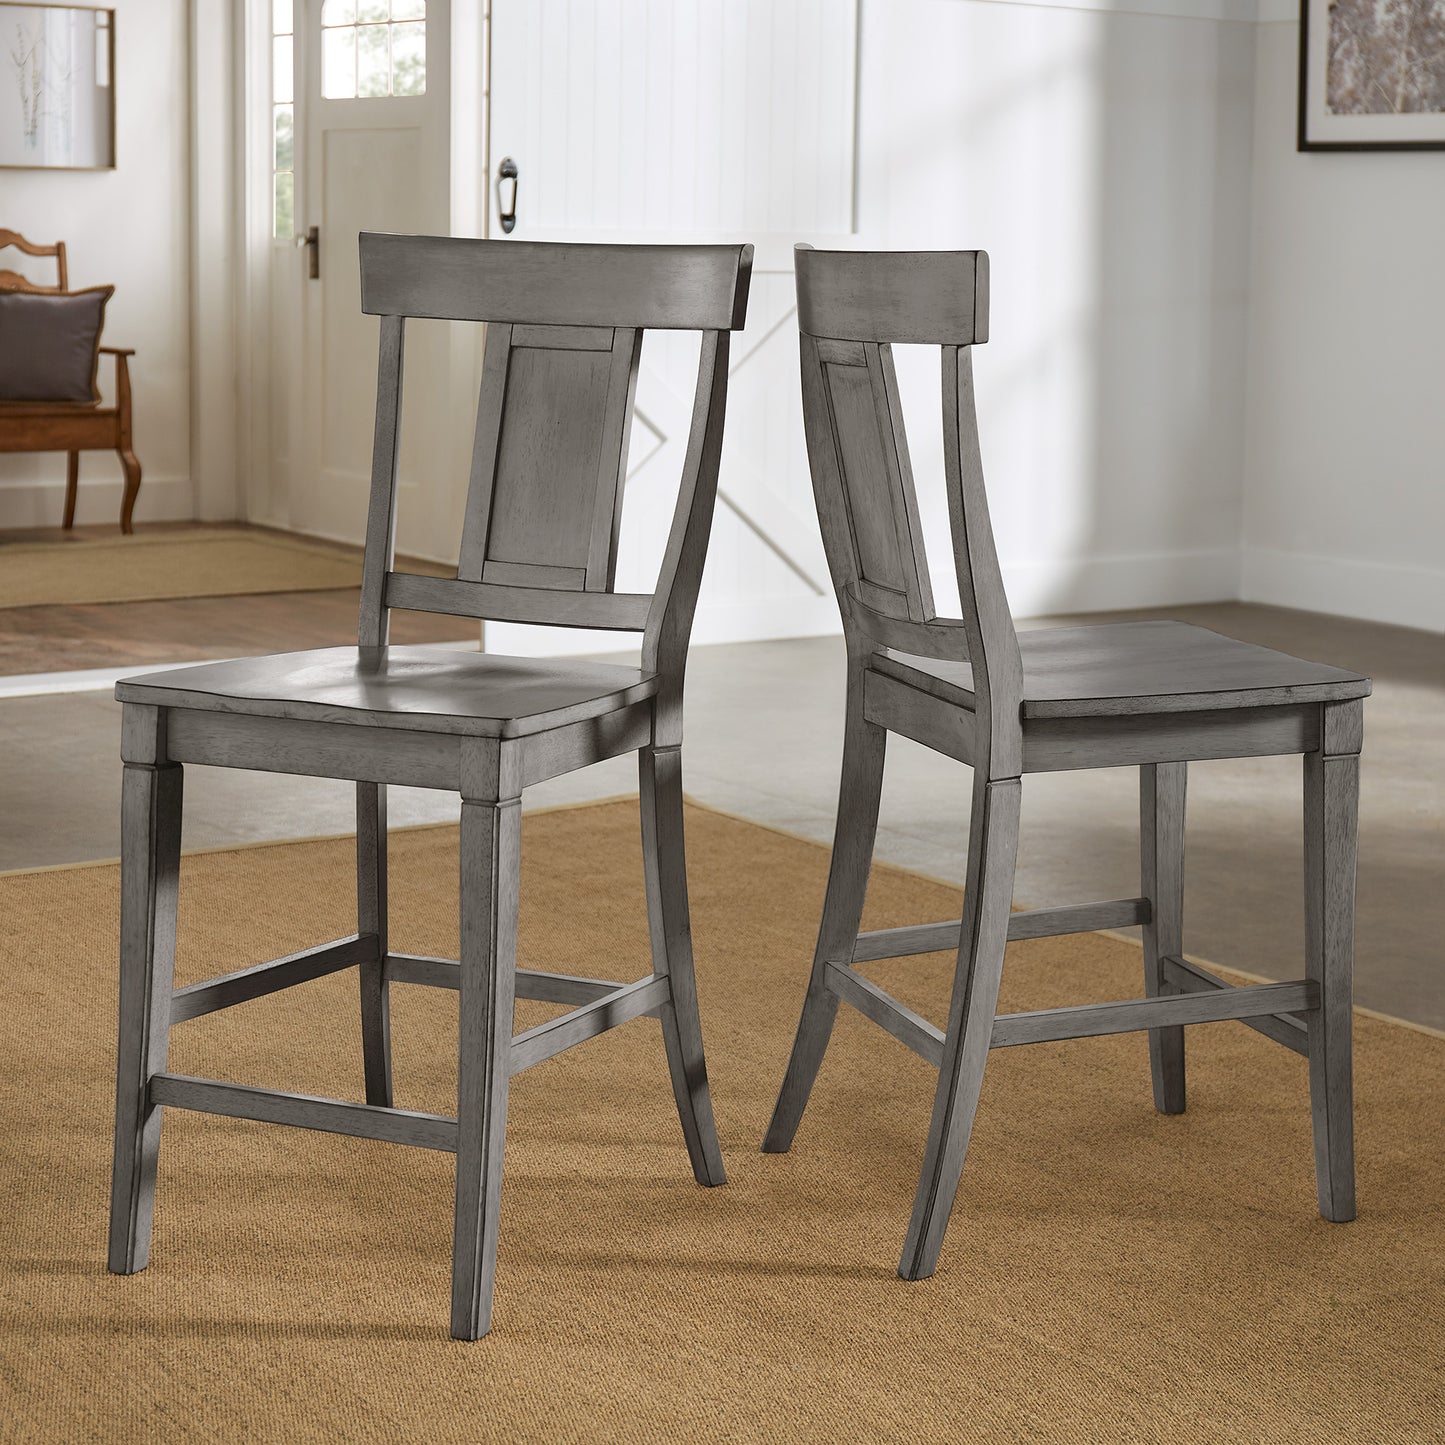 Panel Back Wood Counter Height Chairs (Set of 2) - Antique Grey